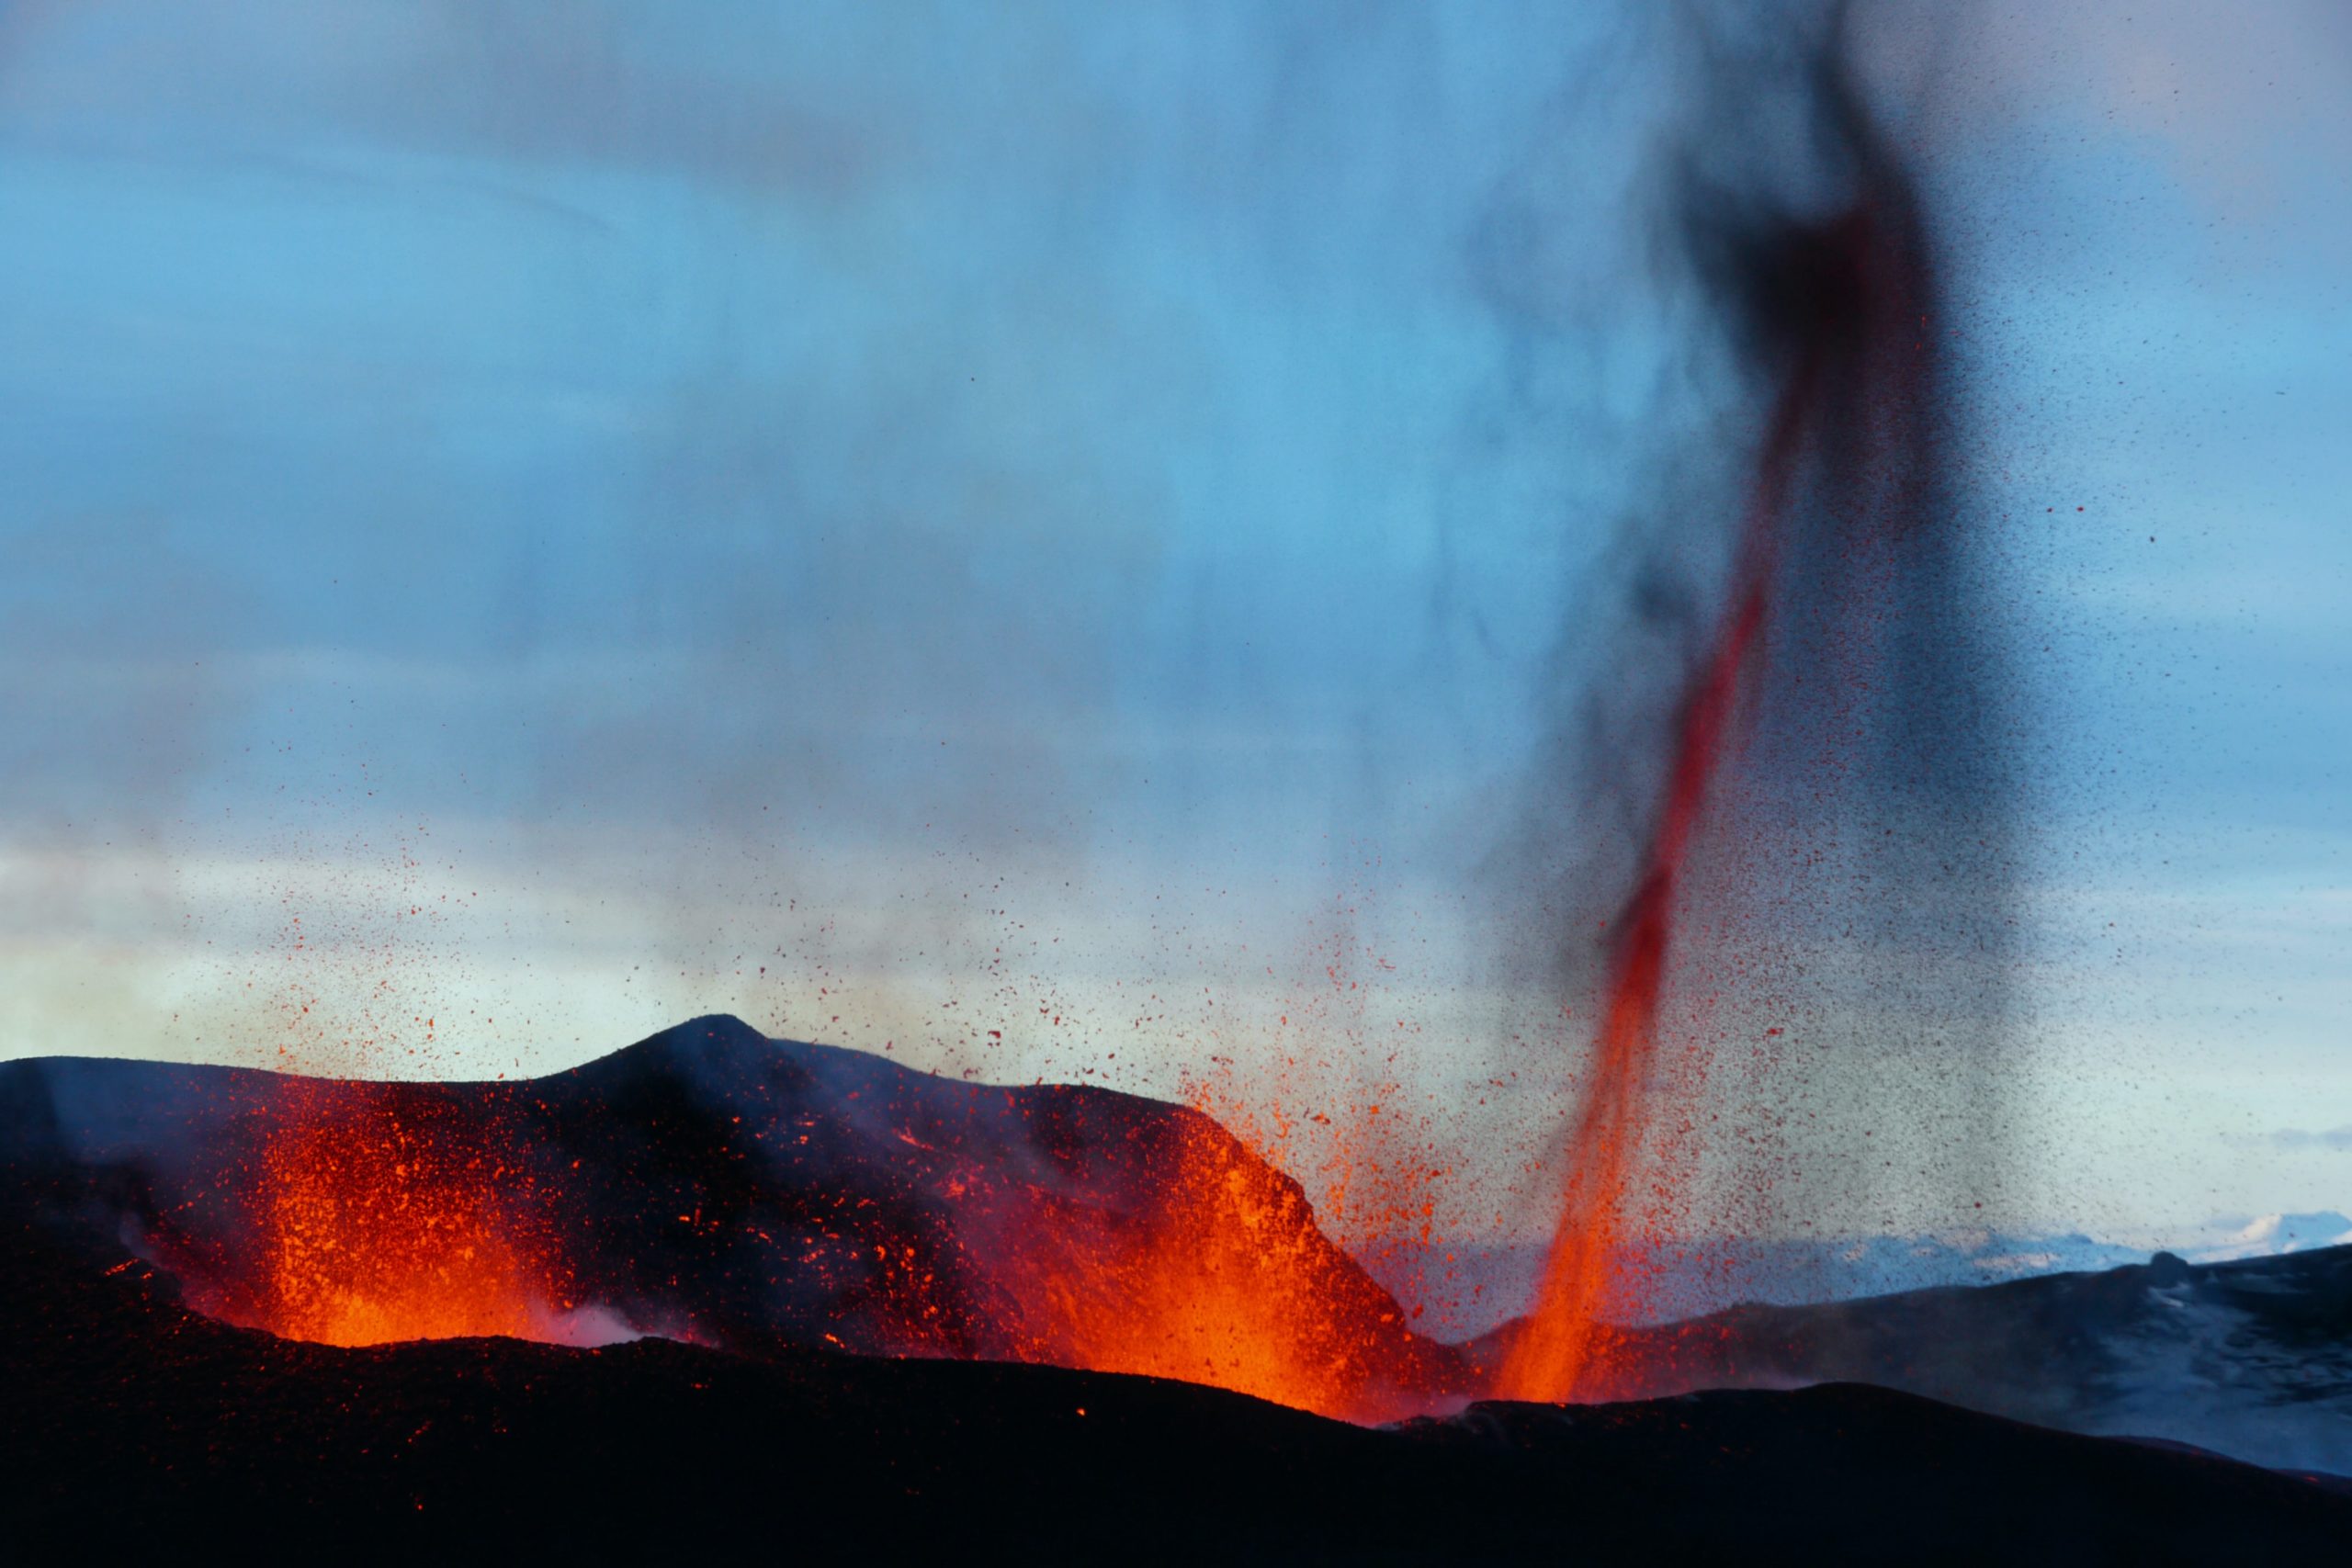 Lava erupts from the ground in Iceland